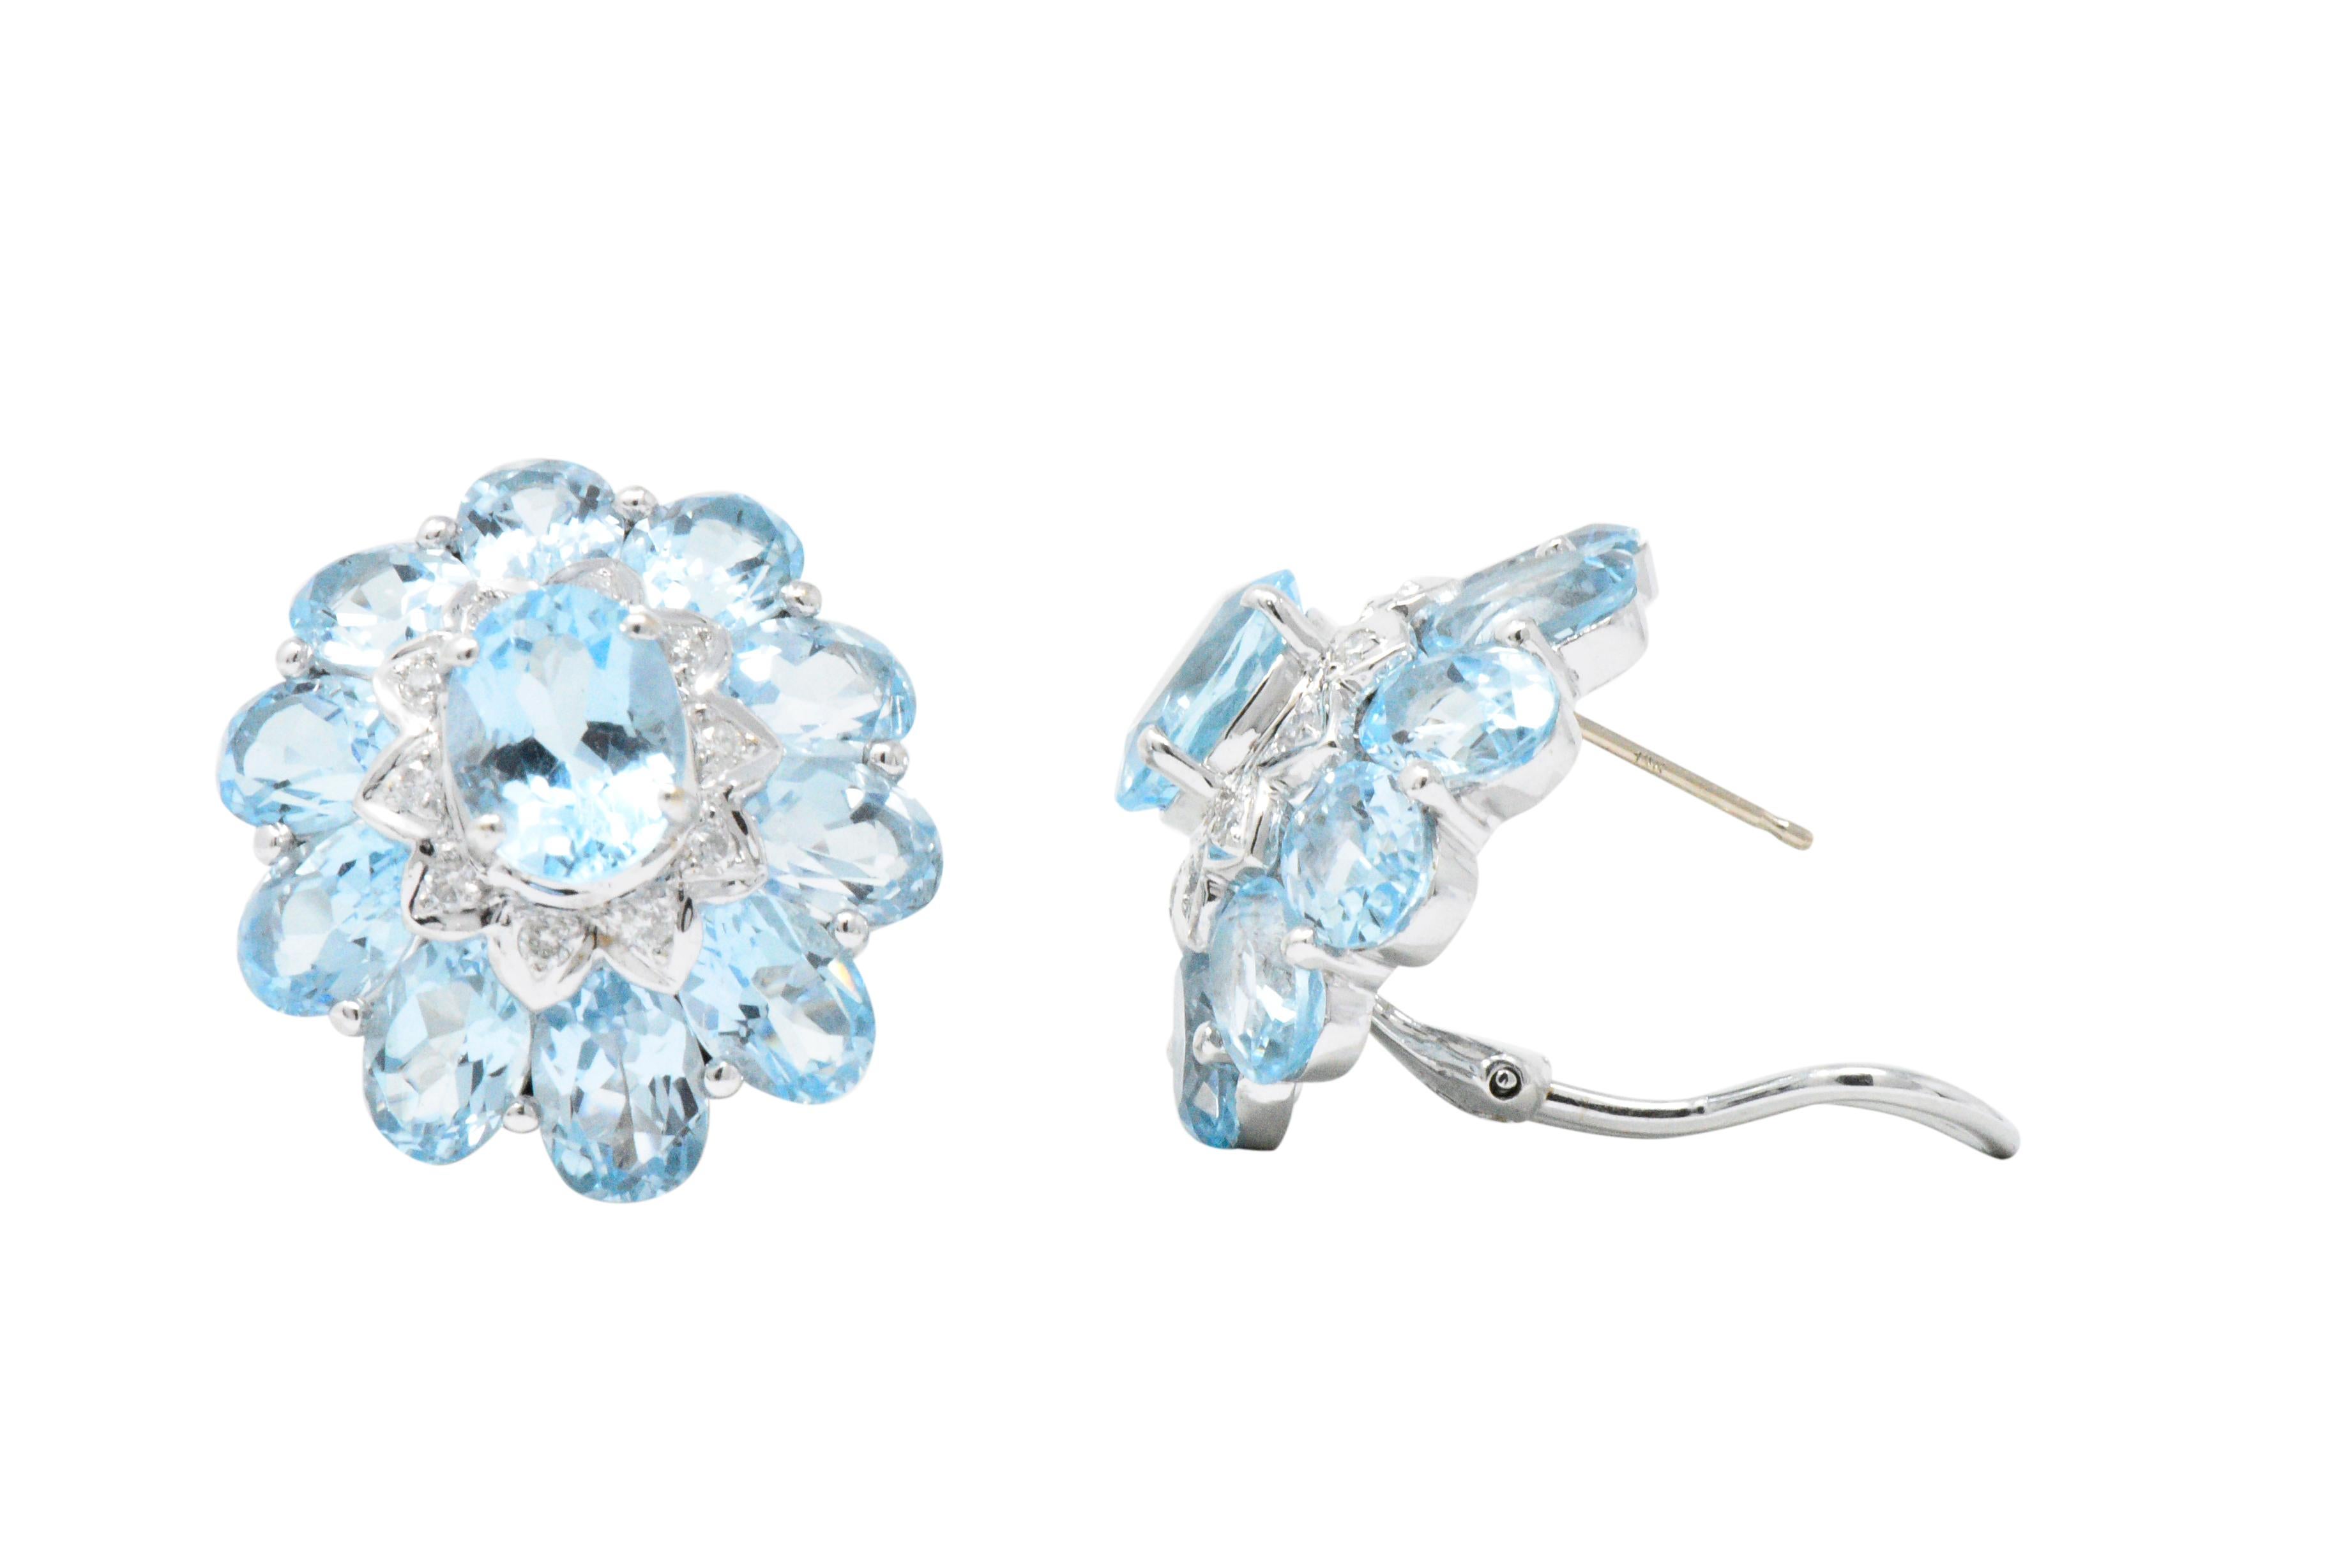 Cluster motif centering an oval cut blue topaz with an outer oval cut blue topaz surround, approximately 26.50 carats total for both earrings, bight light blue, very well matched

Between the outer and center blue topaz is a round brilliant cut